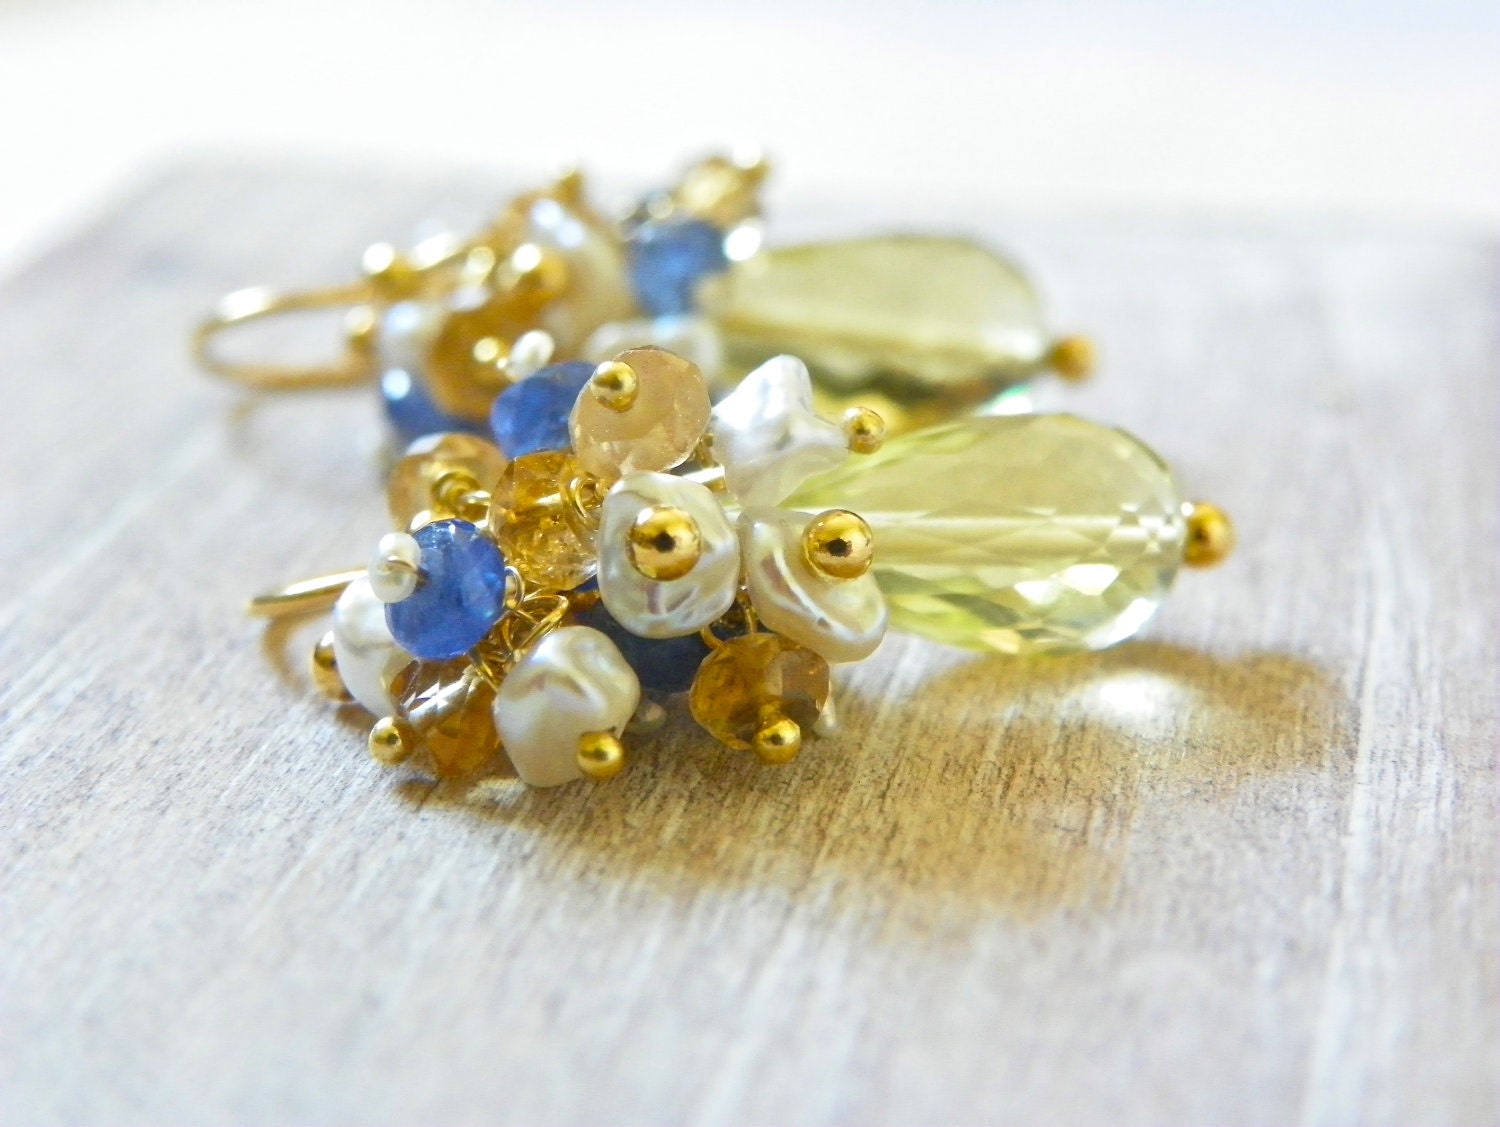 Sapphire Cluster Earrings with 14k Gold, Lemon Quartz and Pearls. Yellow Gemstone Earrings. Nautical Something Blue. Free Shipping,